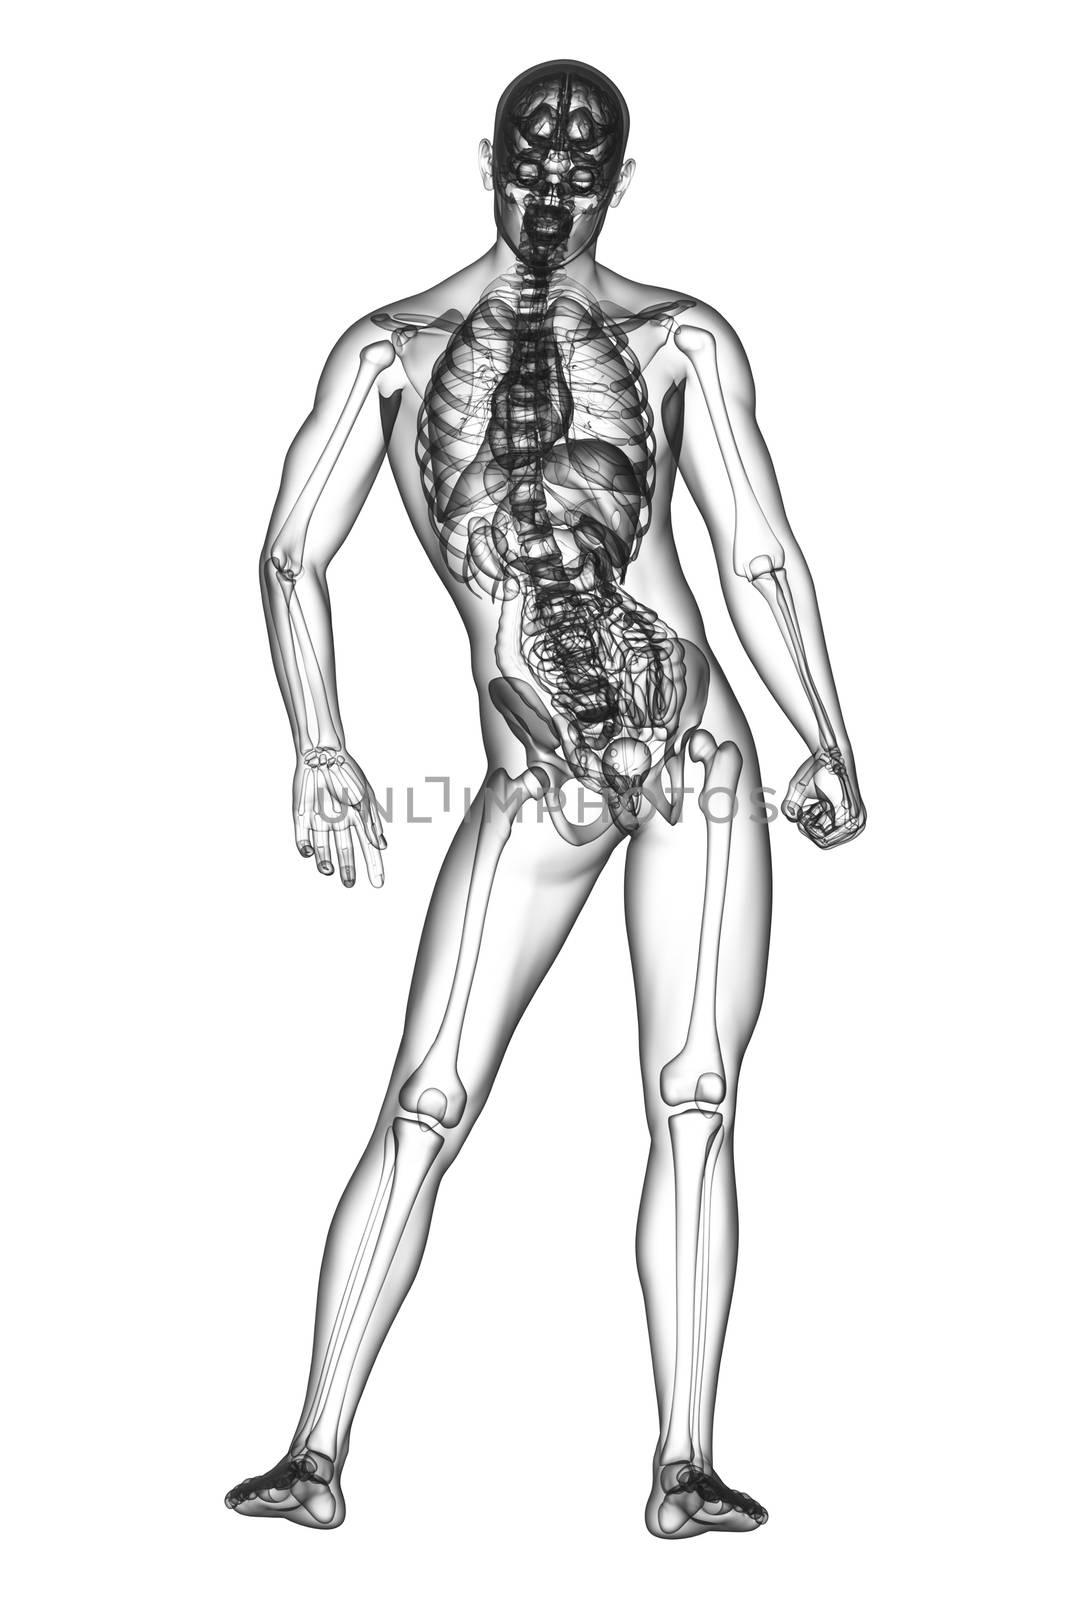 3d render medical illustration of the human anatomy - back view